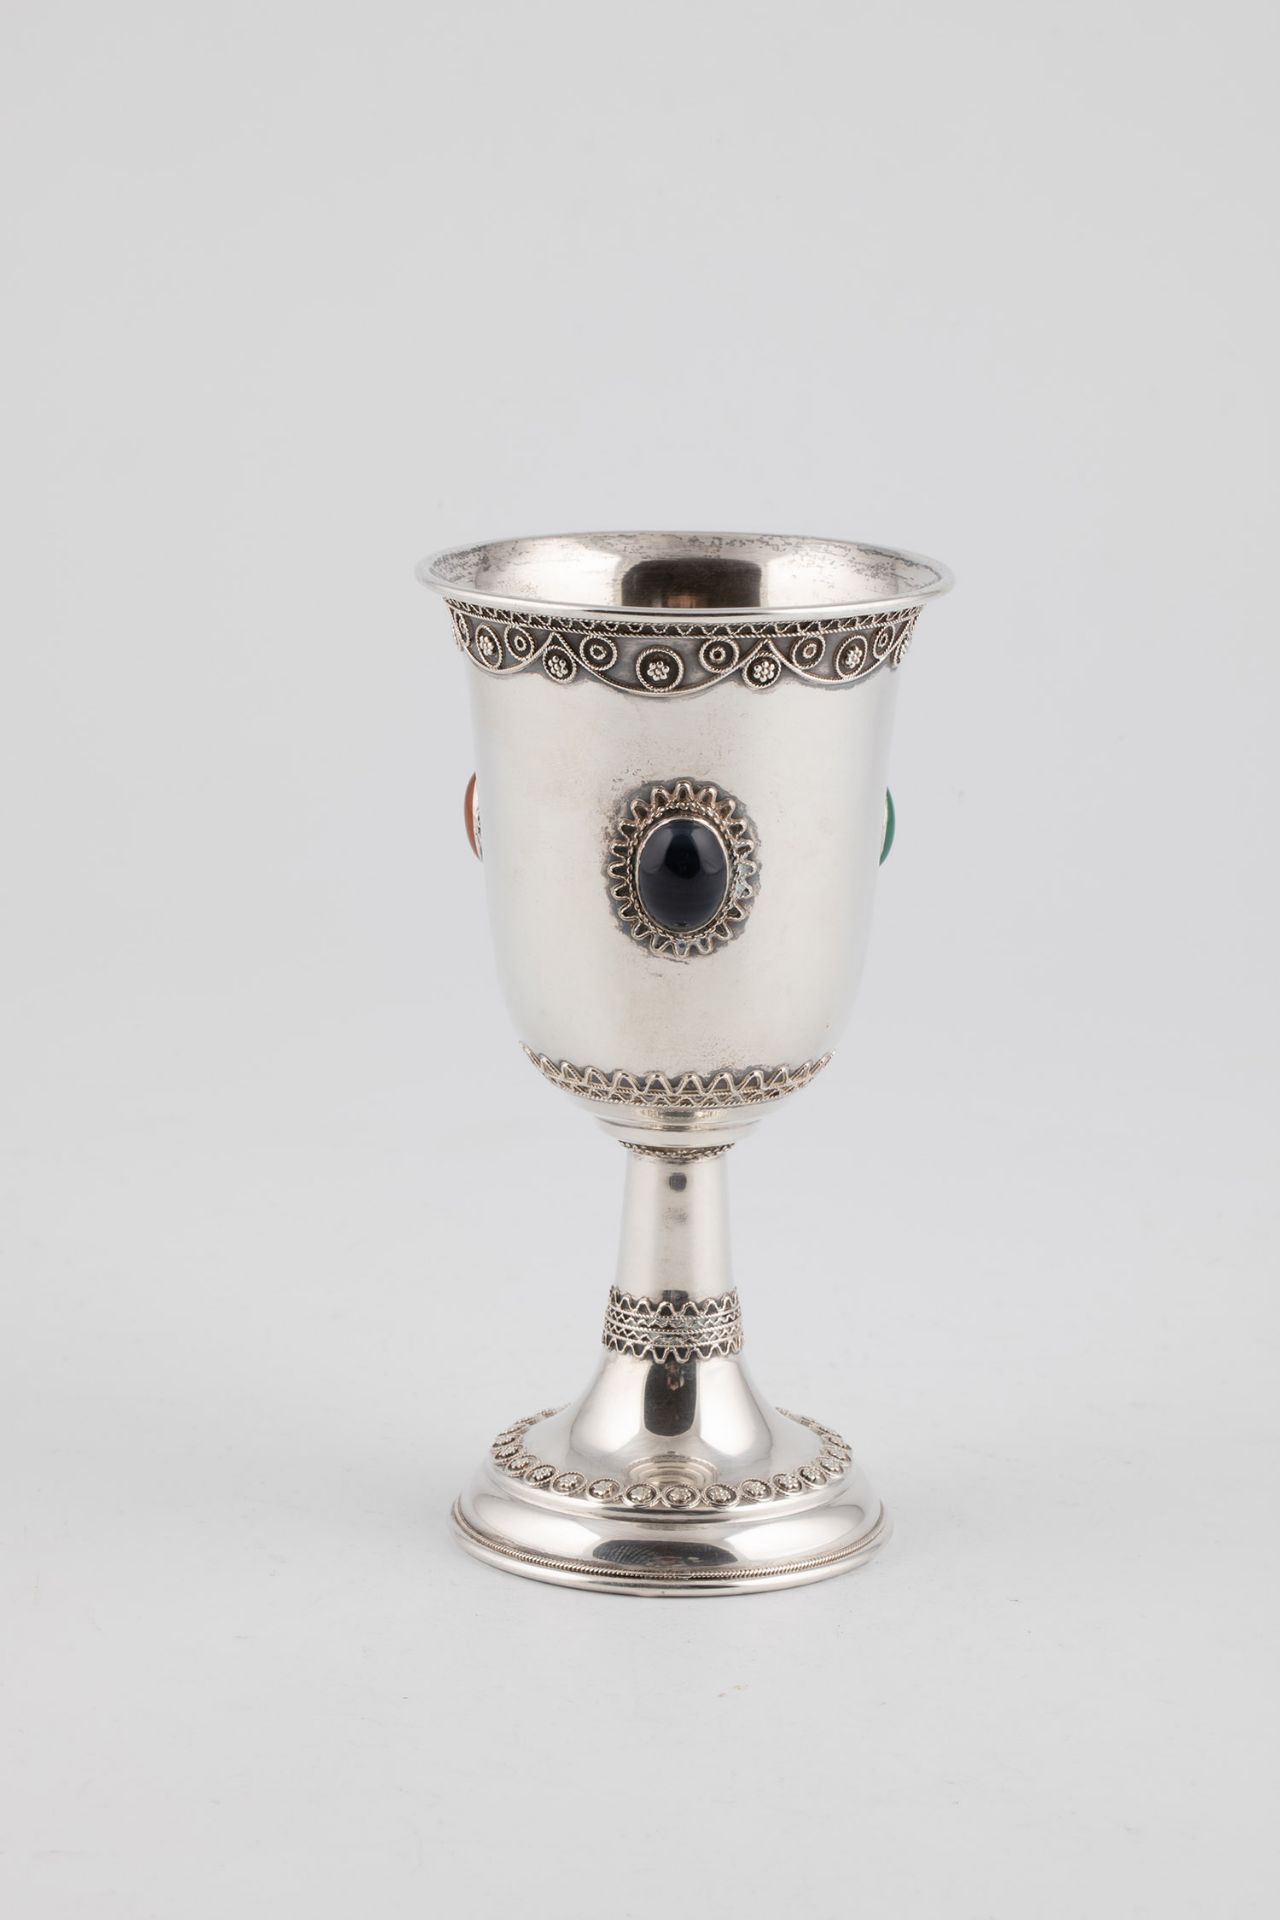 Judaica Cup - Image 3 of 3